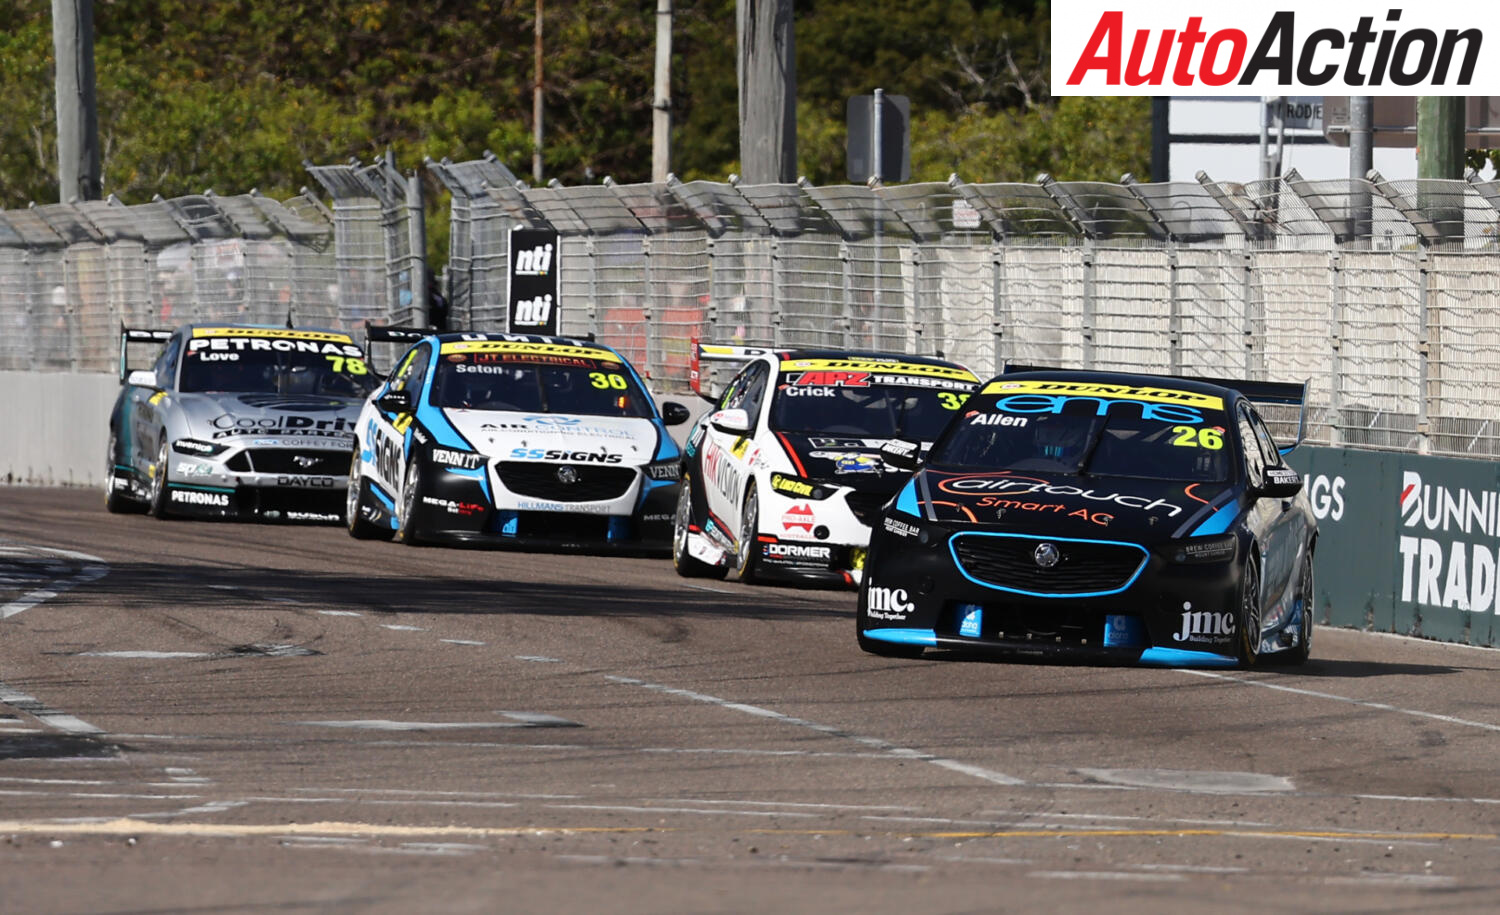 Supercars Ease Super Licence Qualifications